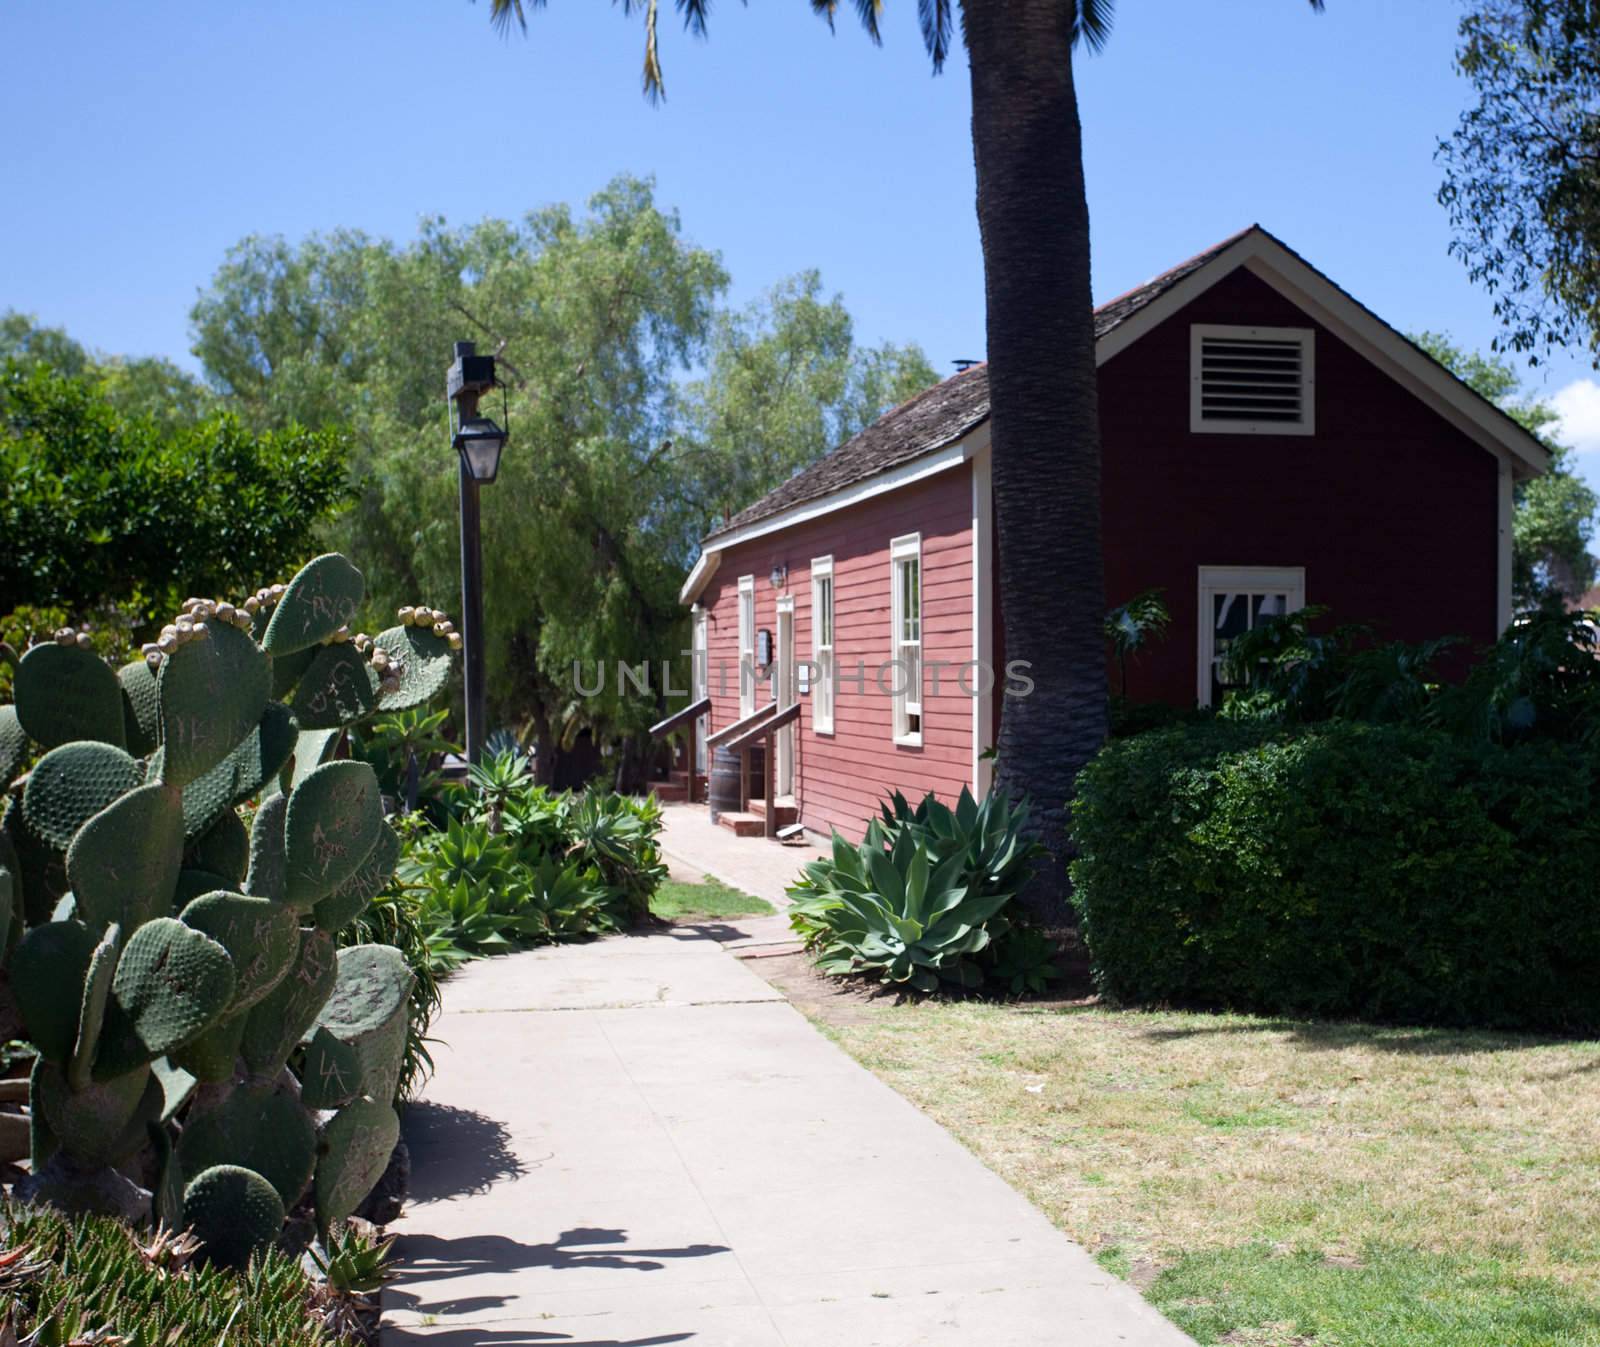 Old Town San Diego with red wooden Mason Street School from 1865